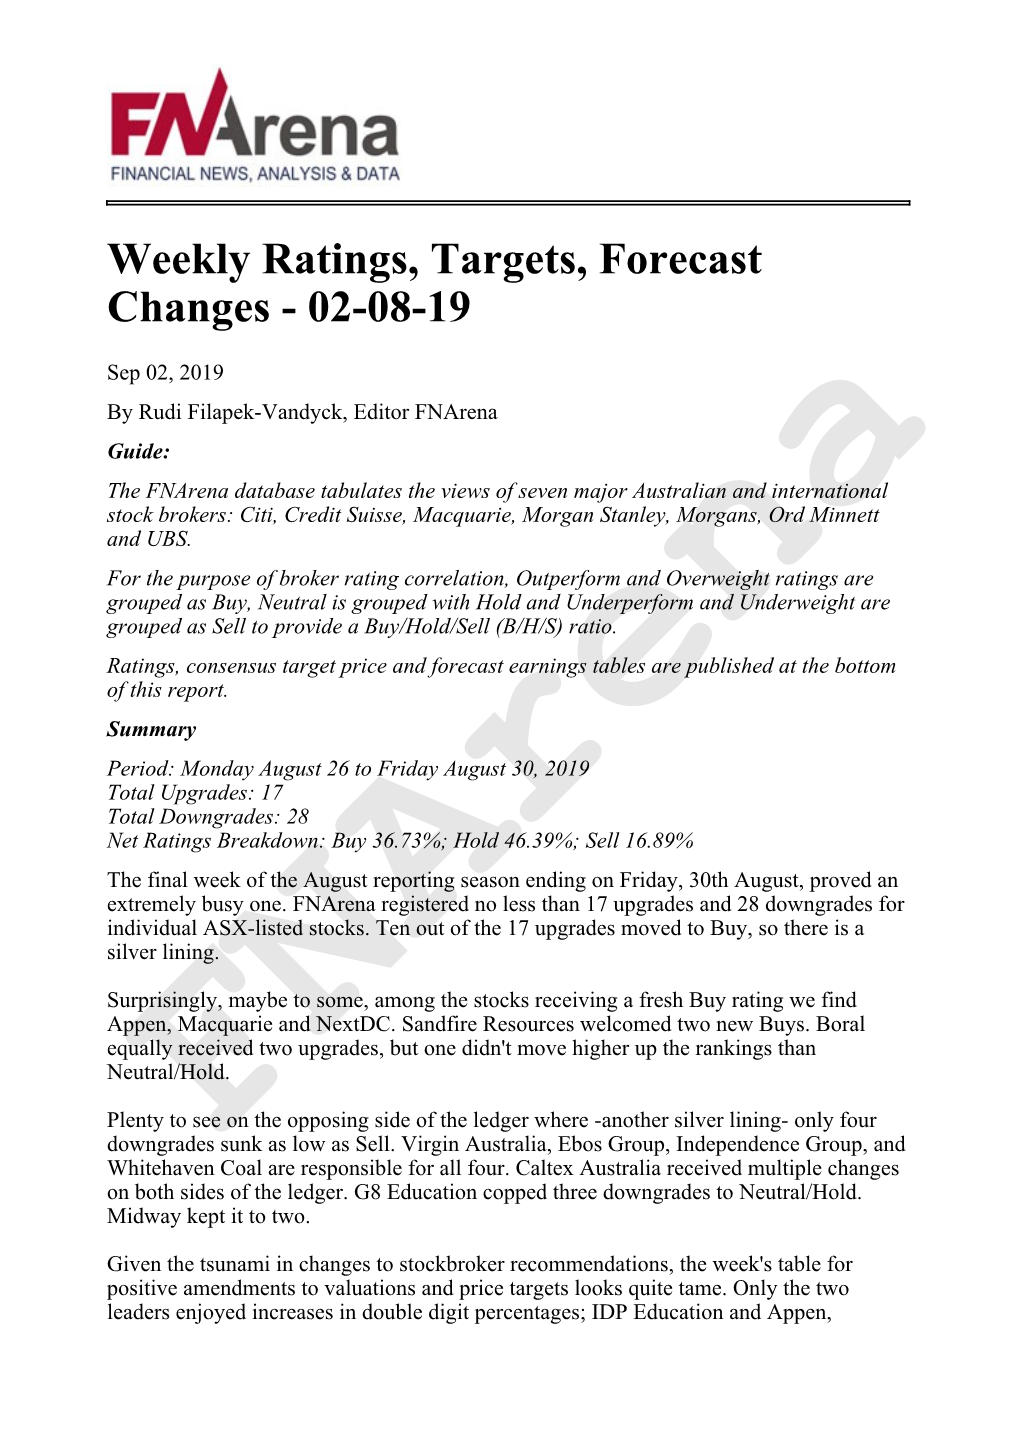 Weekly Ratings, Targets, Forecast Changes - 02-08-19